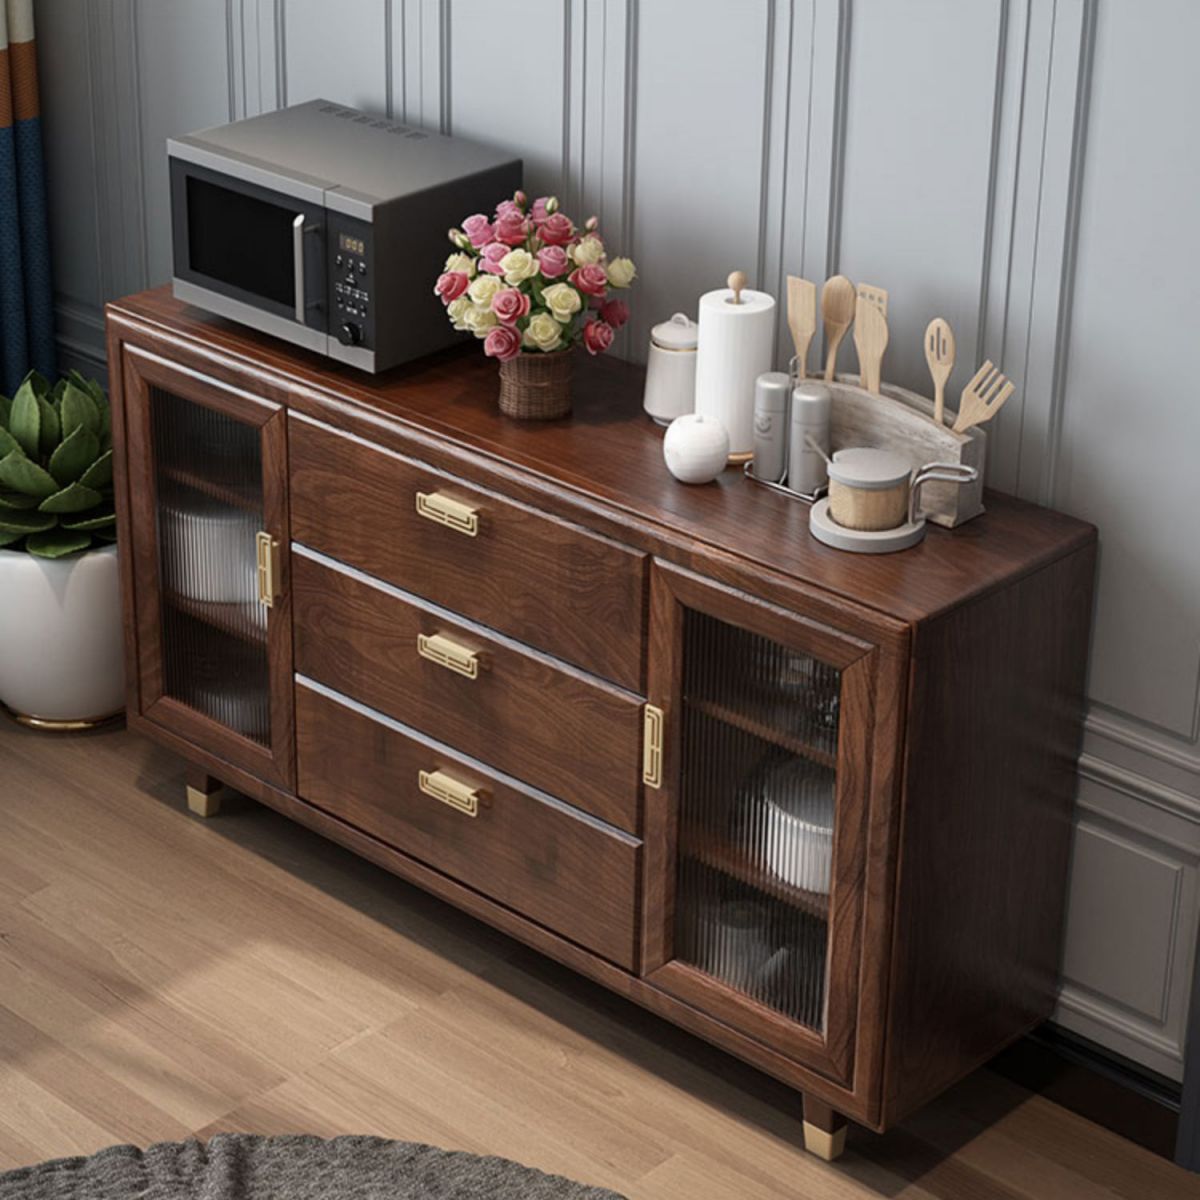 Modern Rubberwood Solid Wood Sideboard 34.5" H Brown Credenza for Dining Room